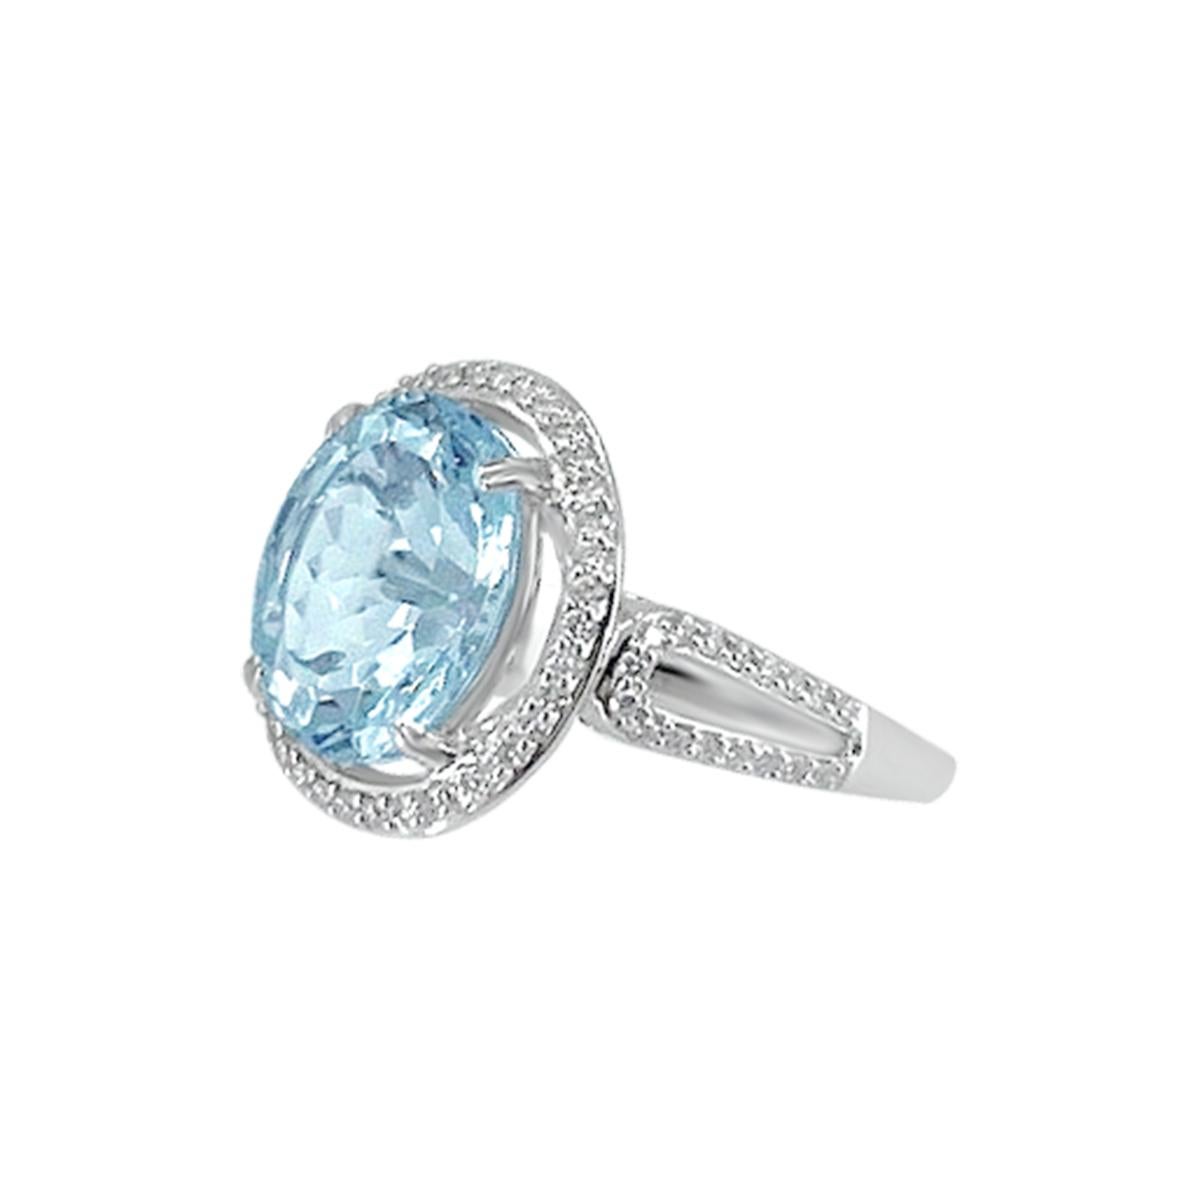 Vintage Style Inspired Aquamarine And Diamond Ring Is Crafted In 14K White Gold With A 4.22Cts Oval Cut 12x10mm Aquamarine Center For A Glamorous And Elegant Look. It's Unique Band With Diamonds Elegantly Contours The finger.

Style#